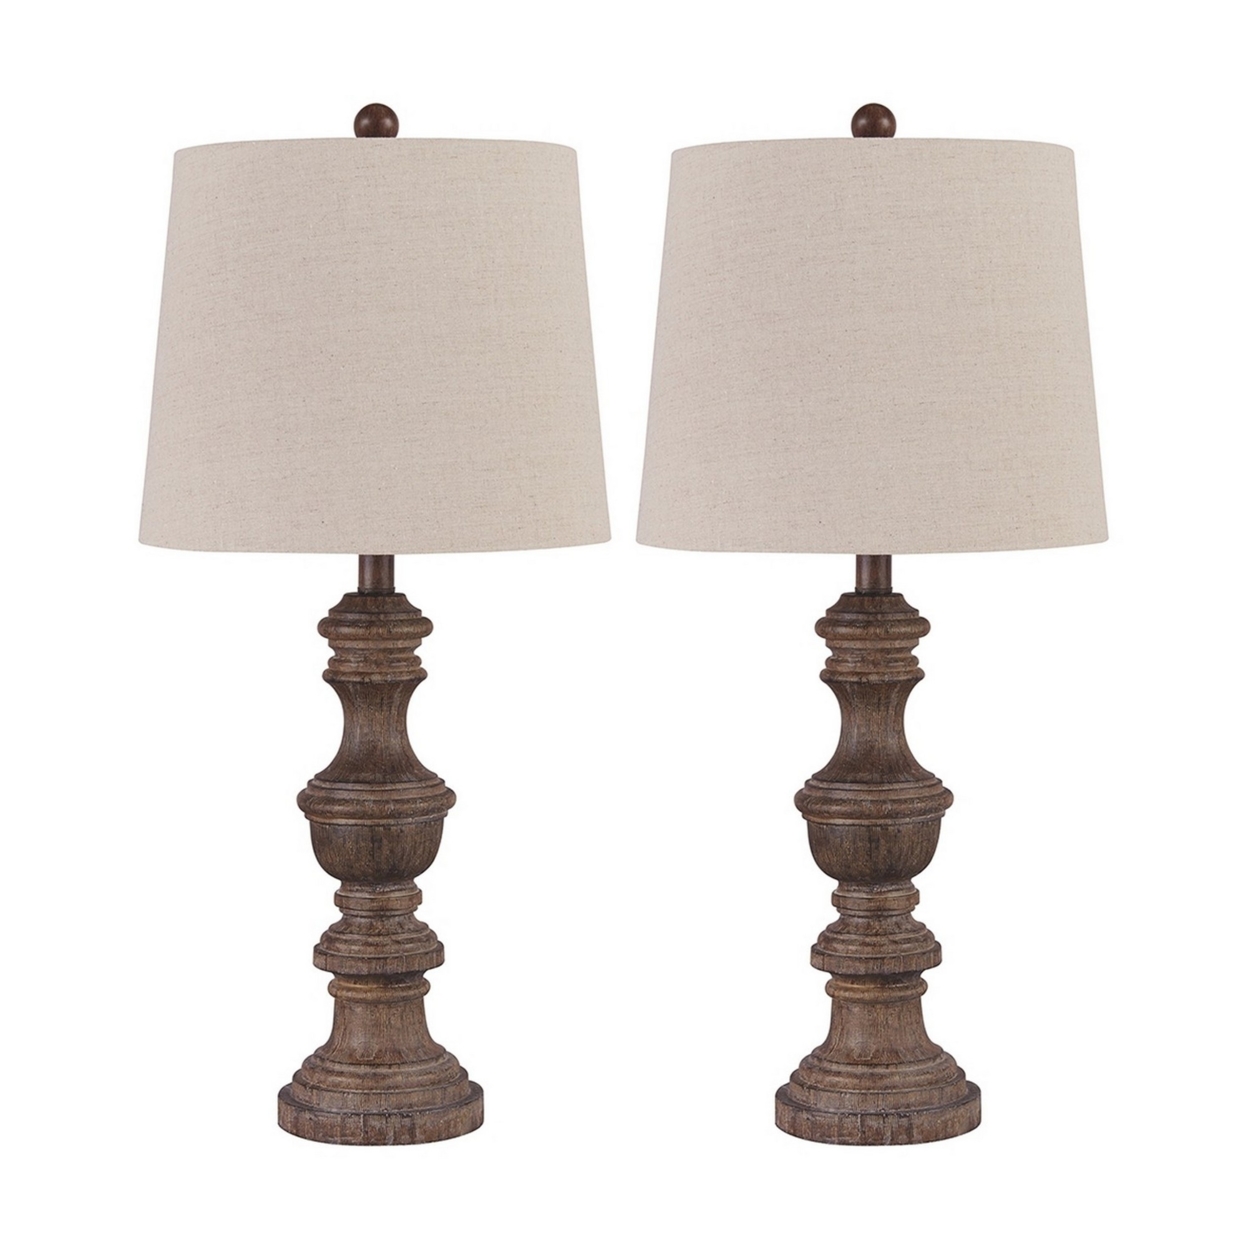 Tapered Fabric Shade Table Lamp With Turned Base, Set Of 2, Gray And Brown- Saltoro Sherpi